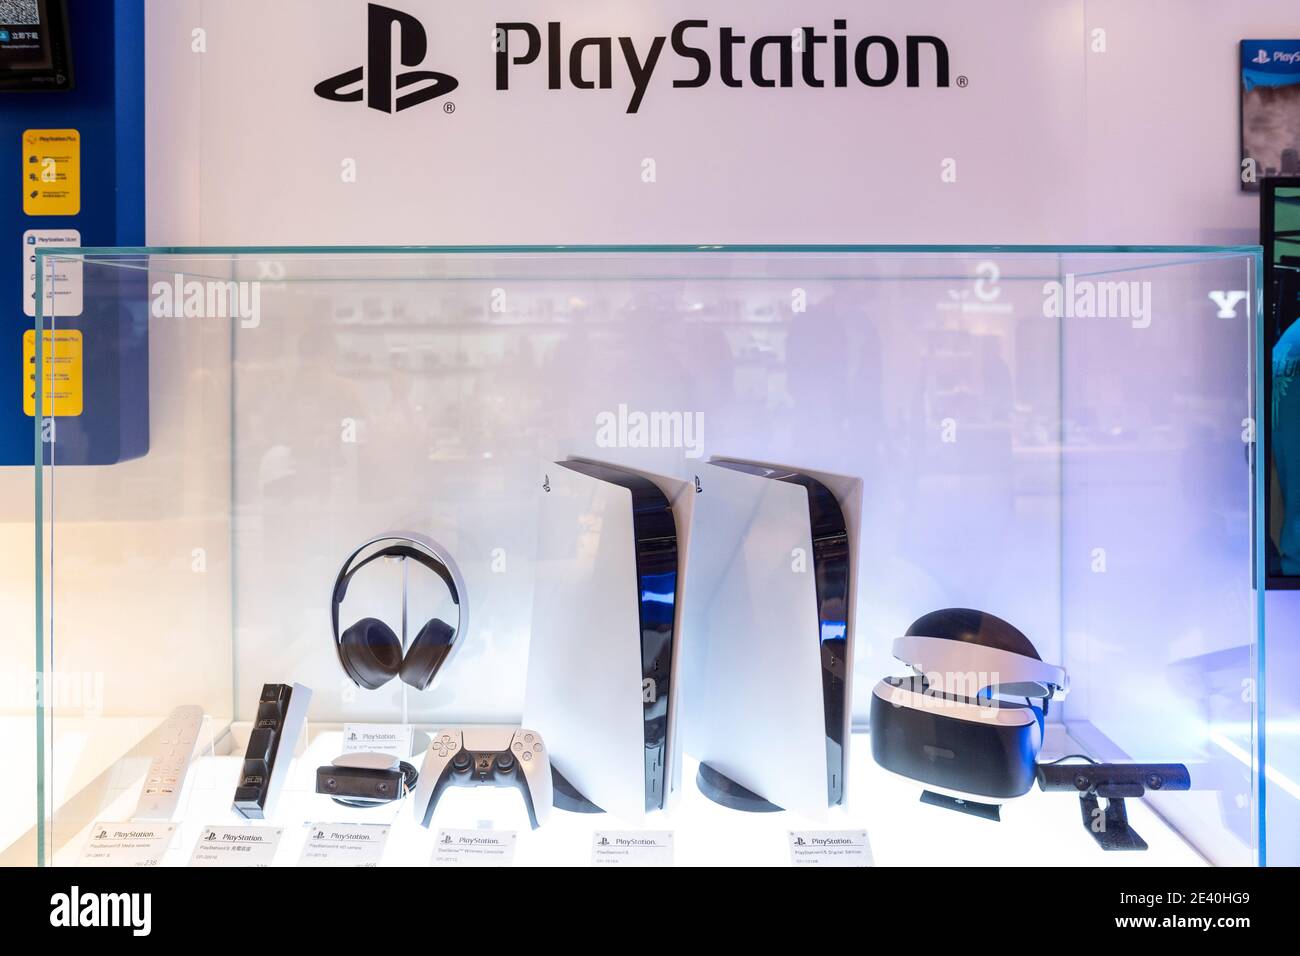 Japanese video gaming system brand created and owned Sony Computer Entertainment, PlayStation 5, is seen at its official store in Hong Kong Stock Photo - Alamy